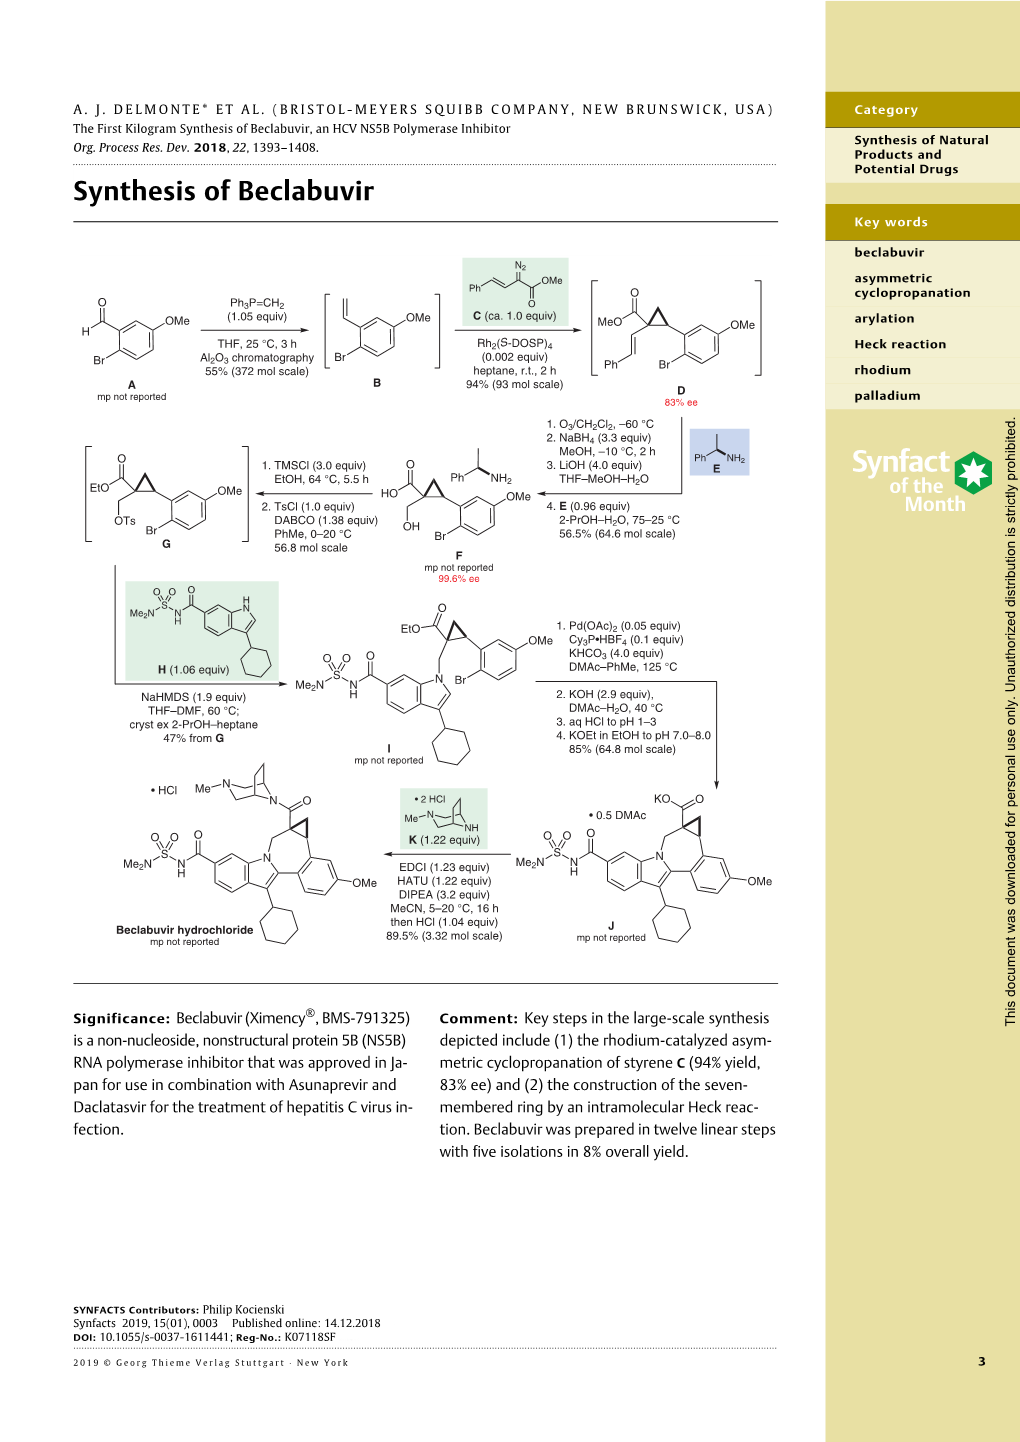 Synthesis of Beclabuvir, an HCV NS5B Polymerase Inhibitor Synthesis of Natural Org